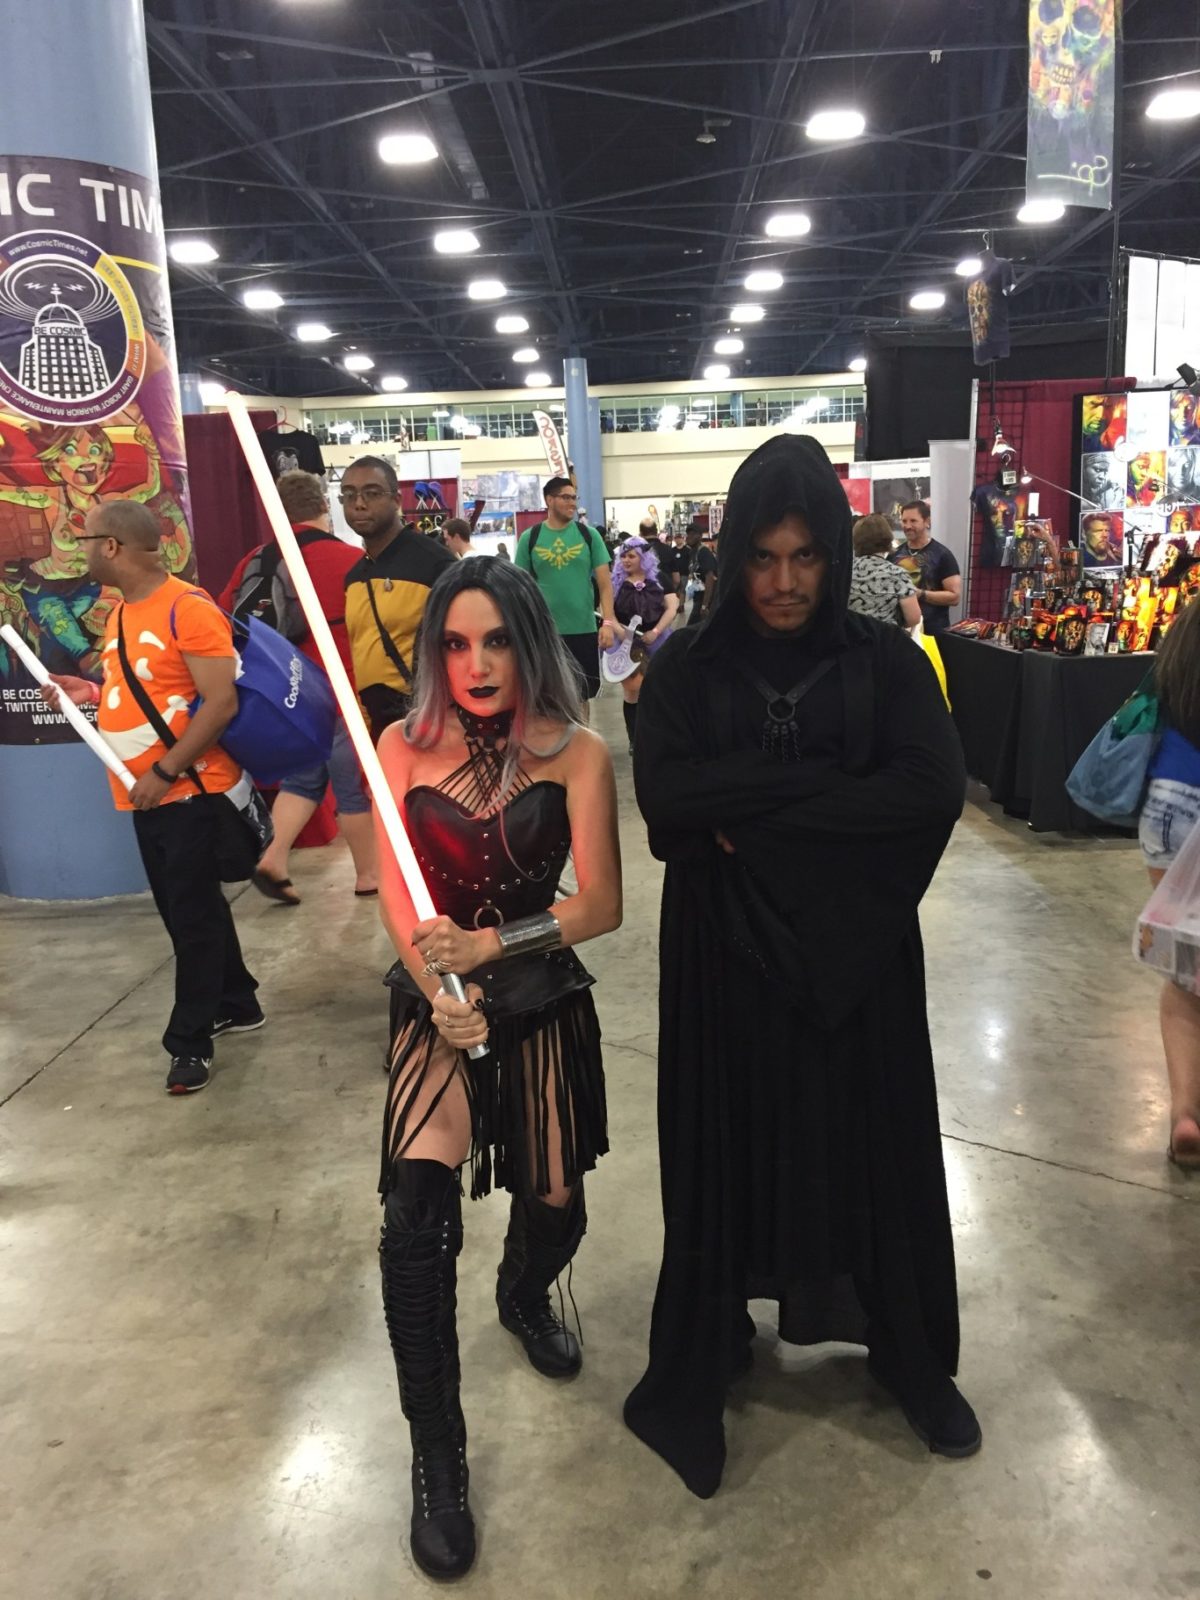 CosView Halloween Marathon:: The make us wanna Join the Dark Side but who are these Sith?